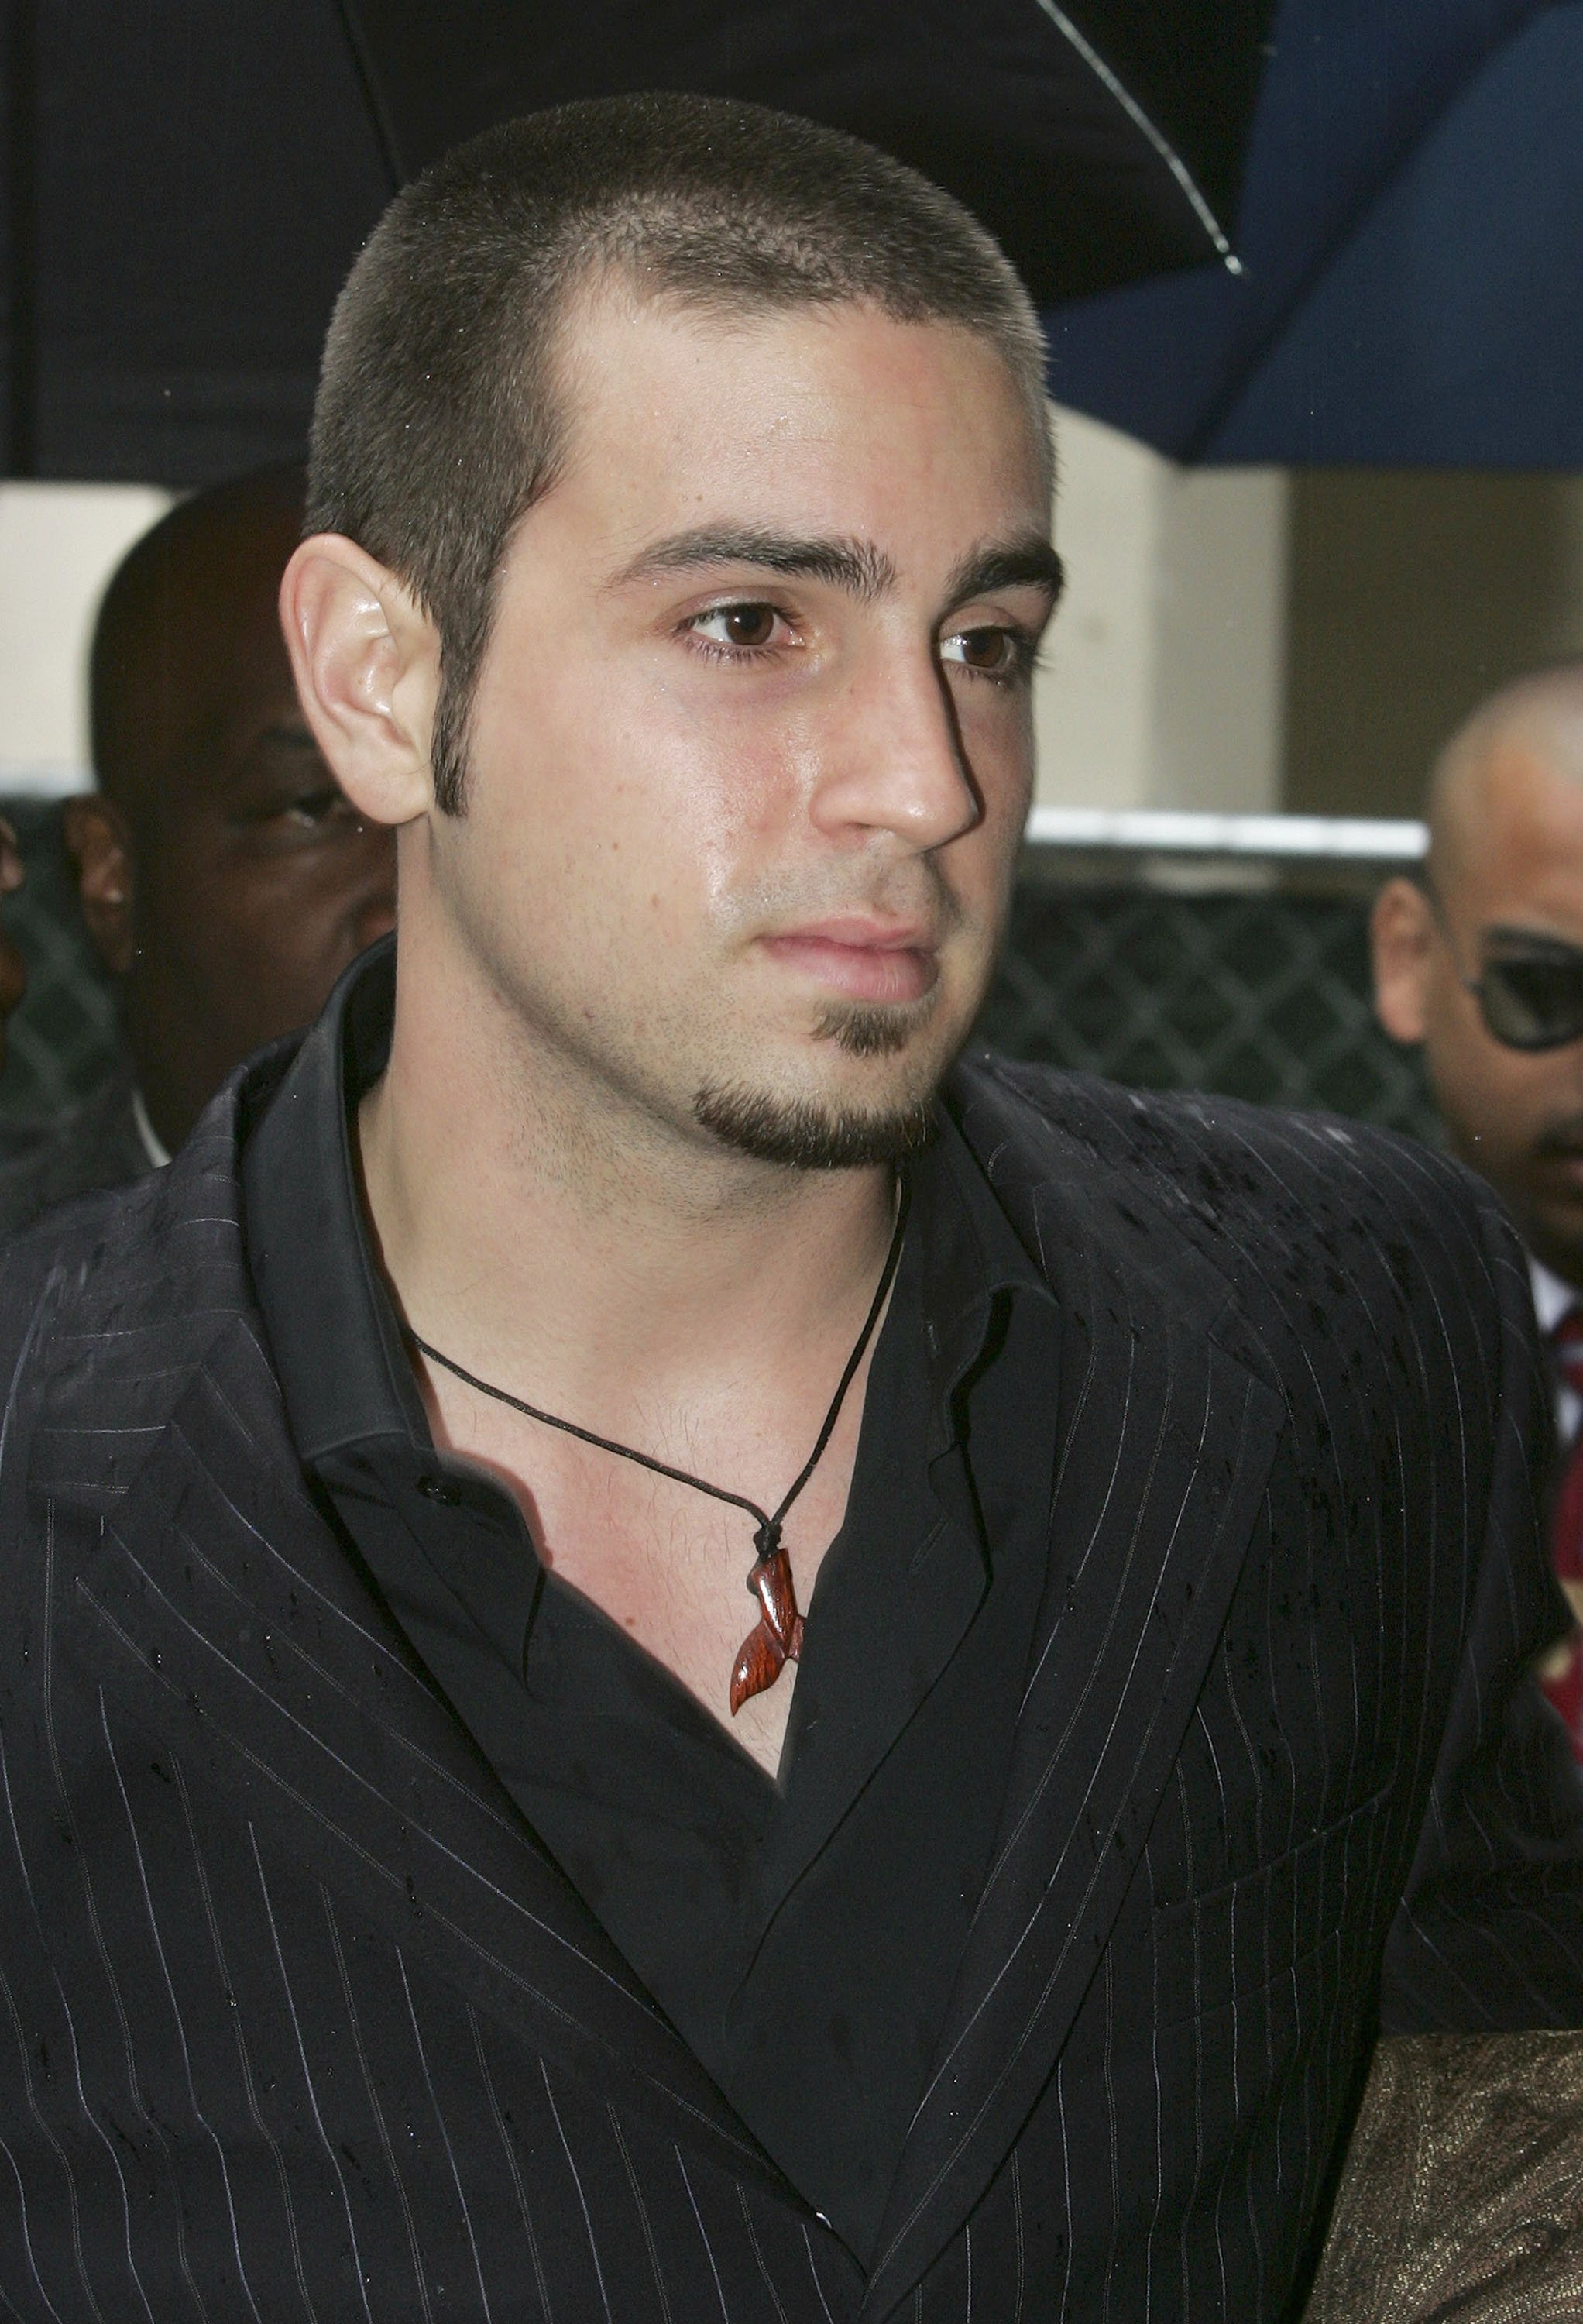 Wade Robson at the Santa Barbara County Superior Court during Michael Jackson's child molestation trial in May 2005. | Photo: Getty Images.